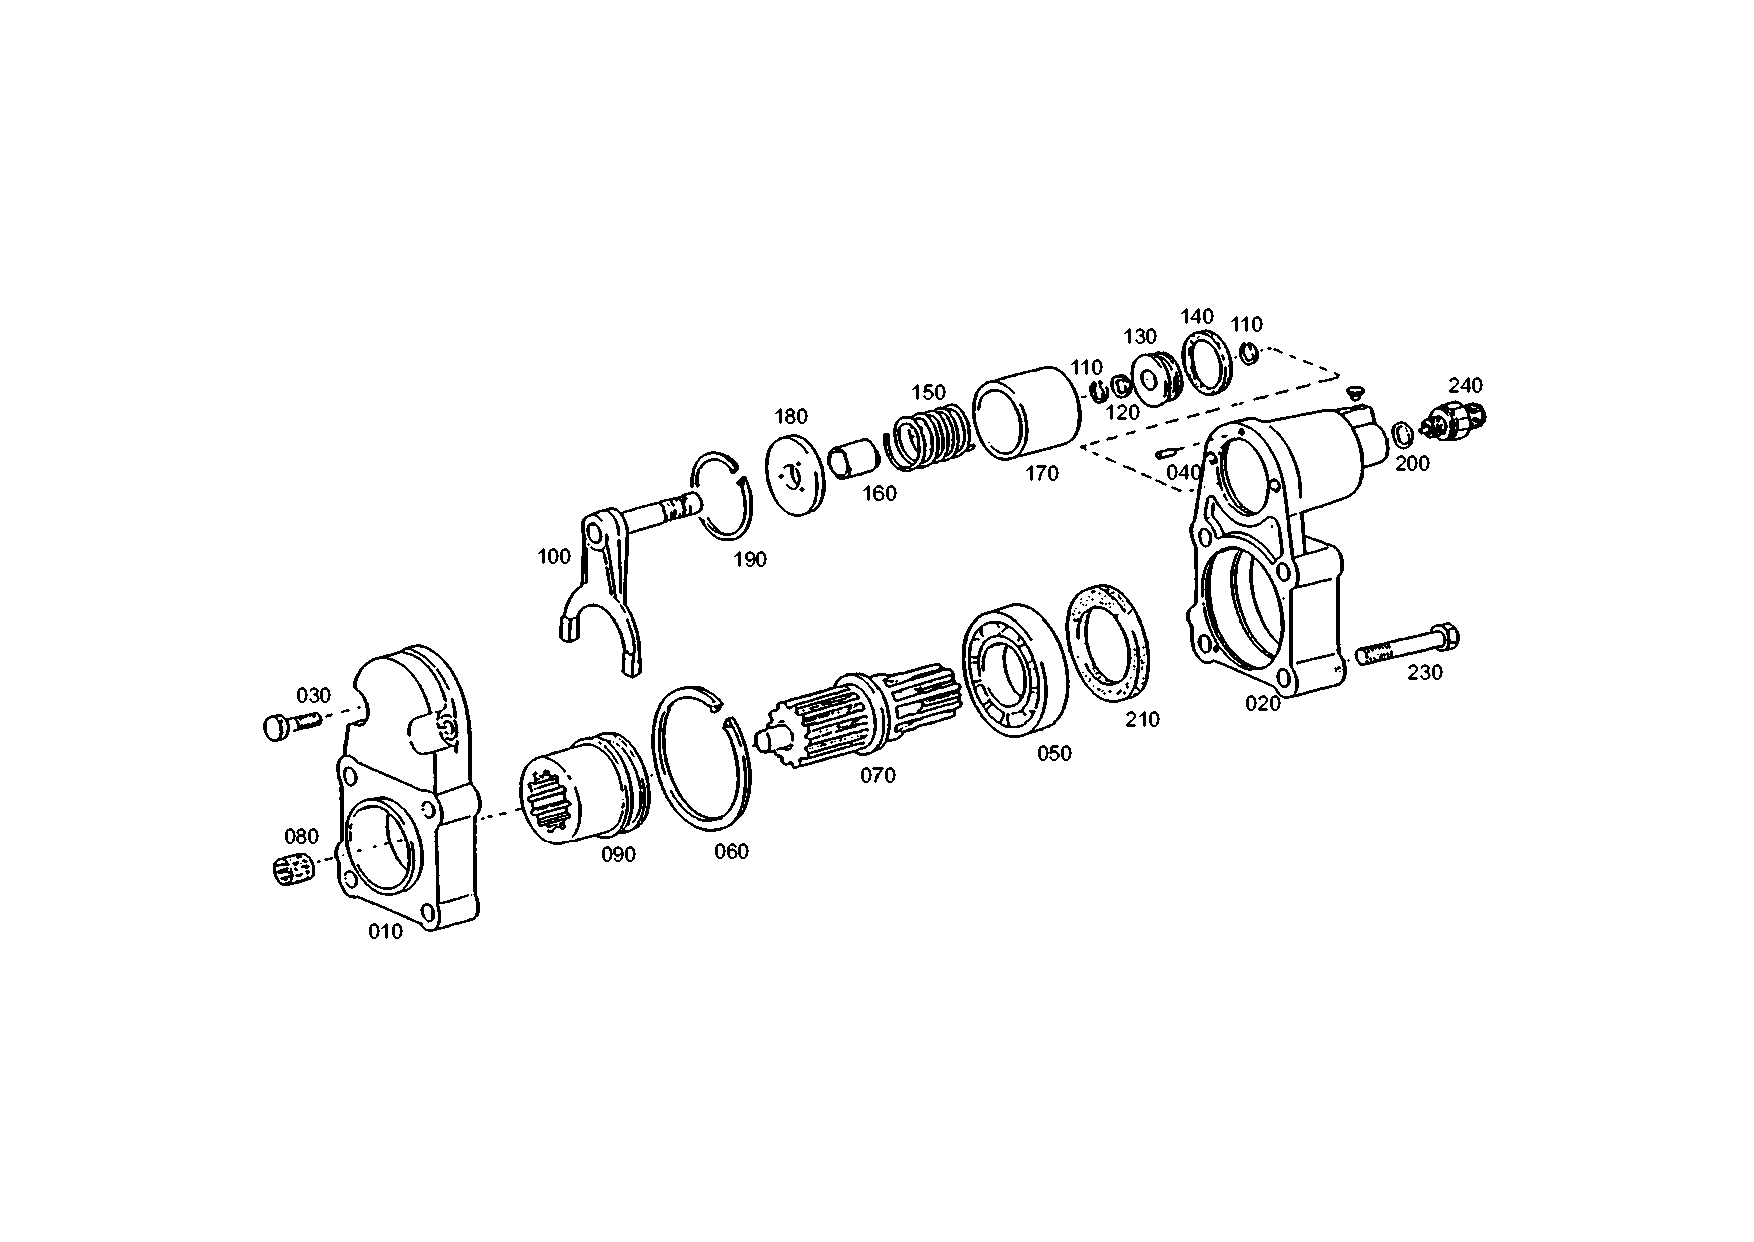 drawing for BMC SAMAYI VE TICARET A.S. 43 22 11 - PRESSURE SWITCH (figure 1)